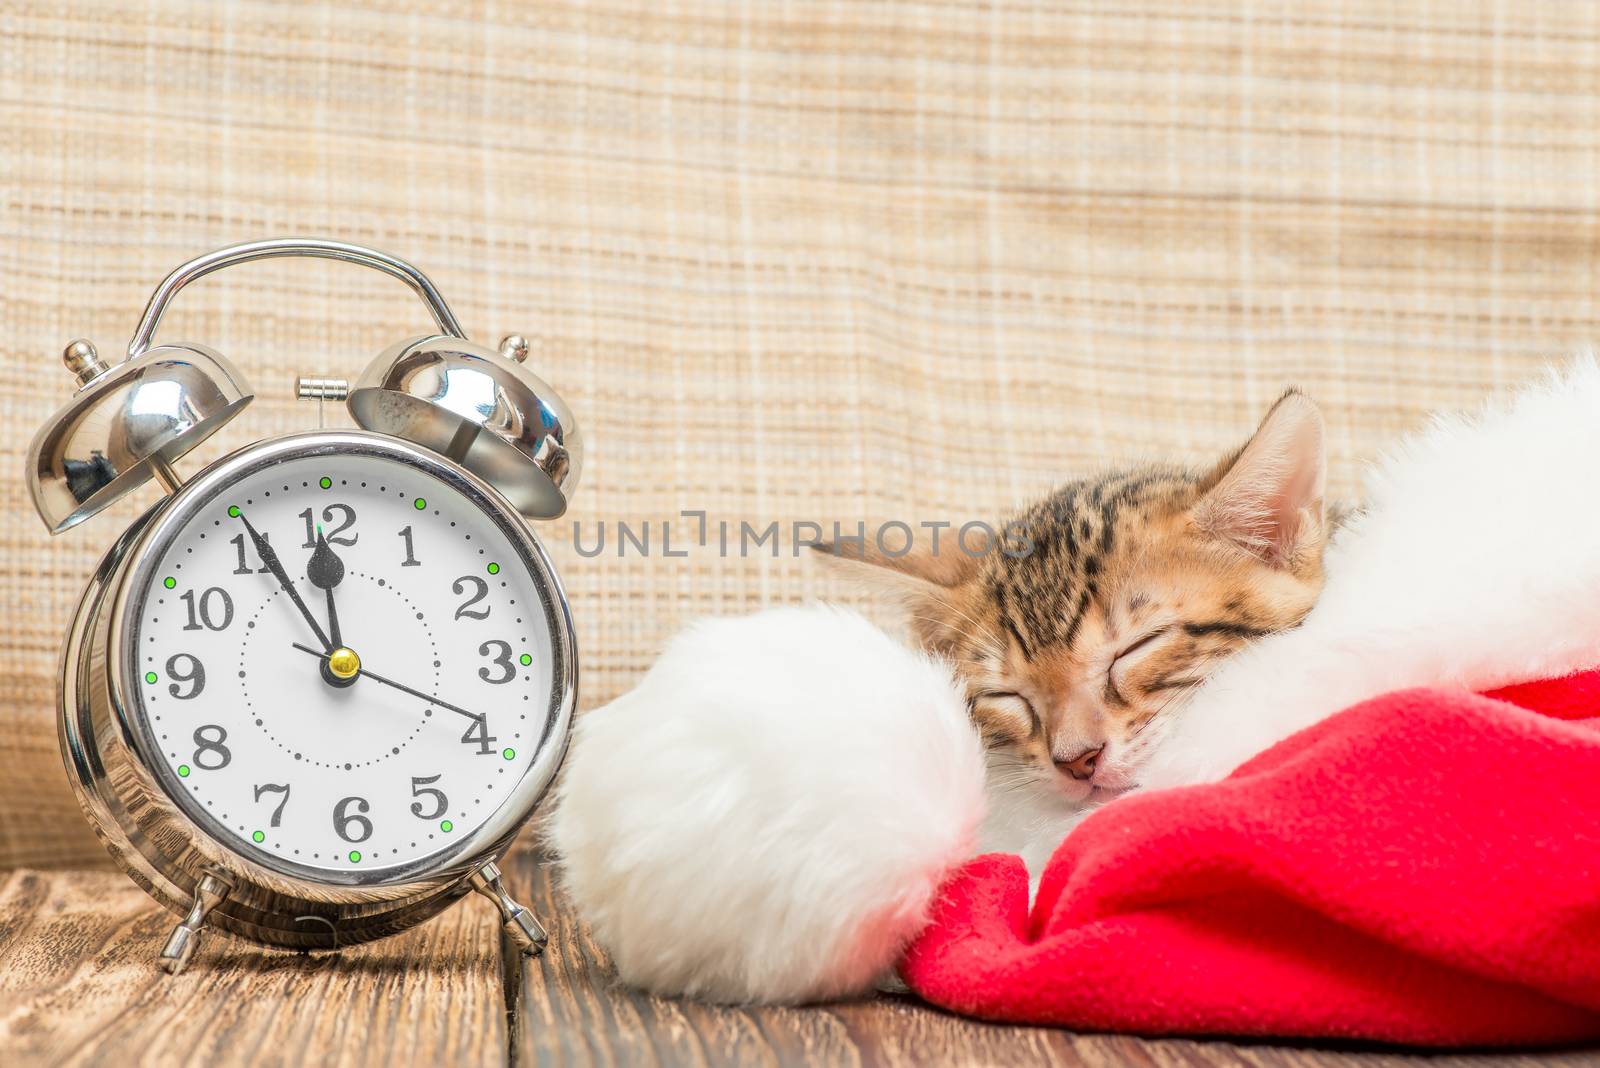 little kitty is sleeping soundly in Santa hat next to the retro alarm clock